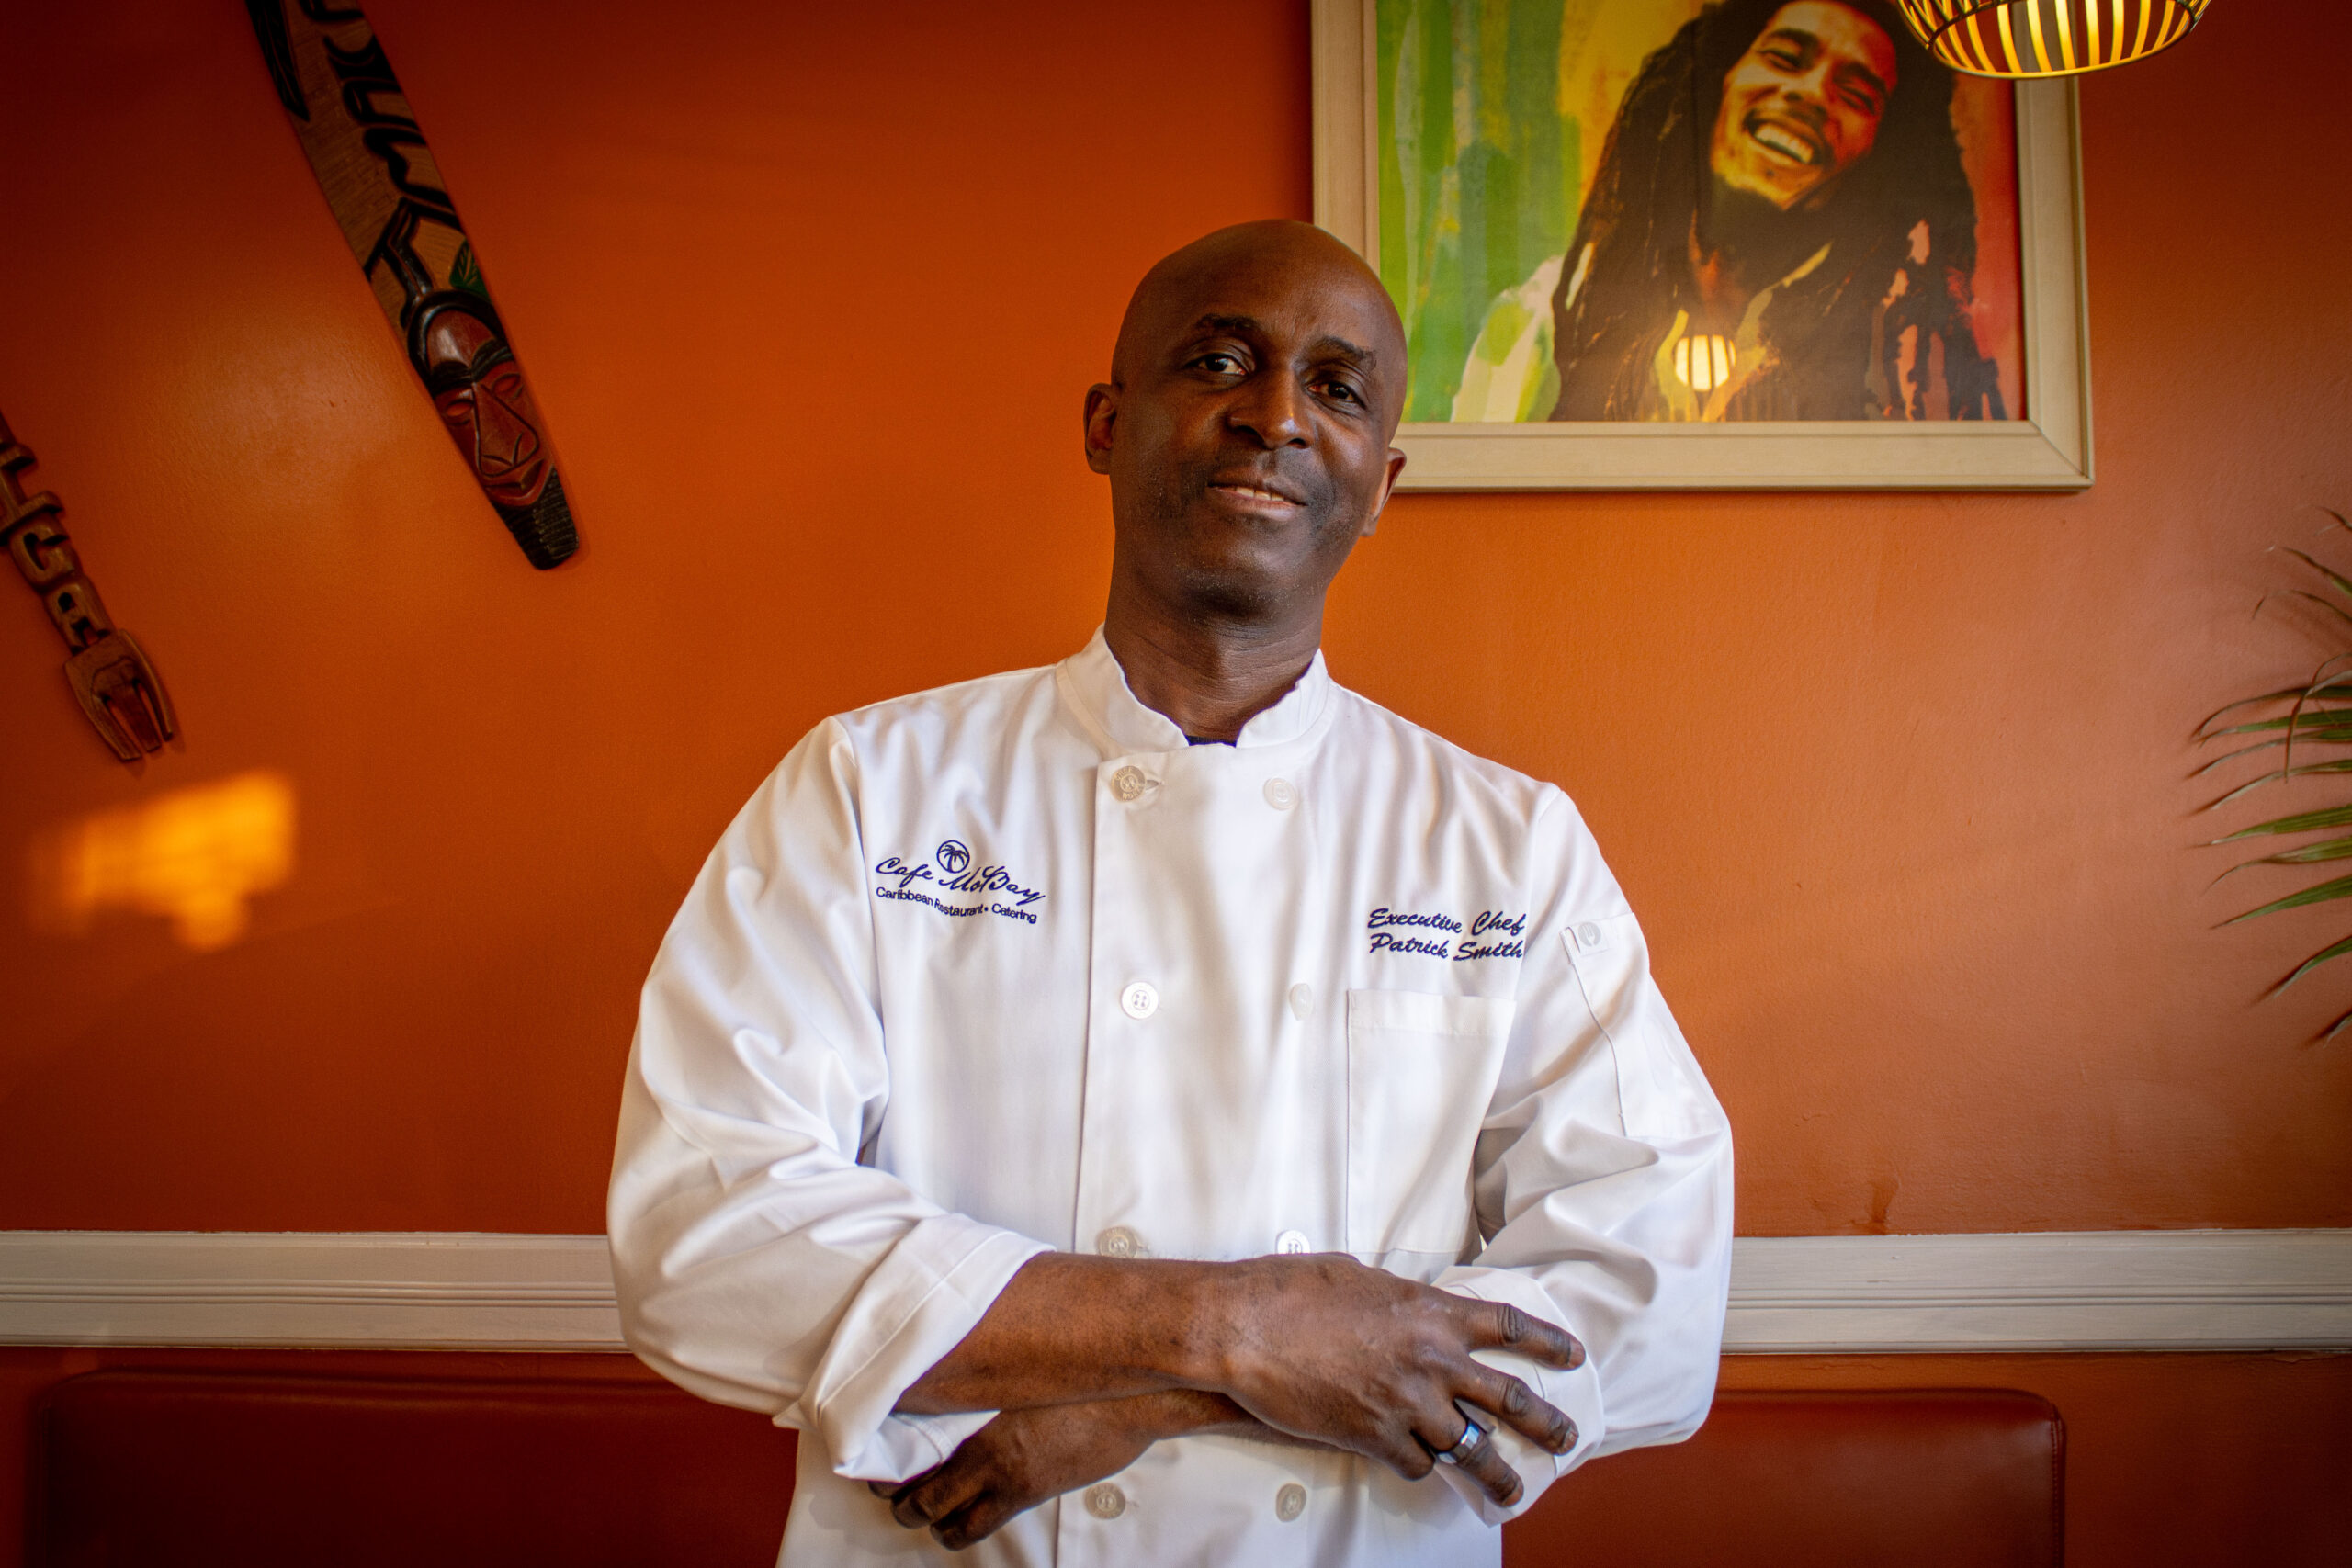 Patrick Smith Executive Chef and owner of Cafe Mobay.